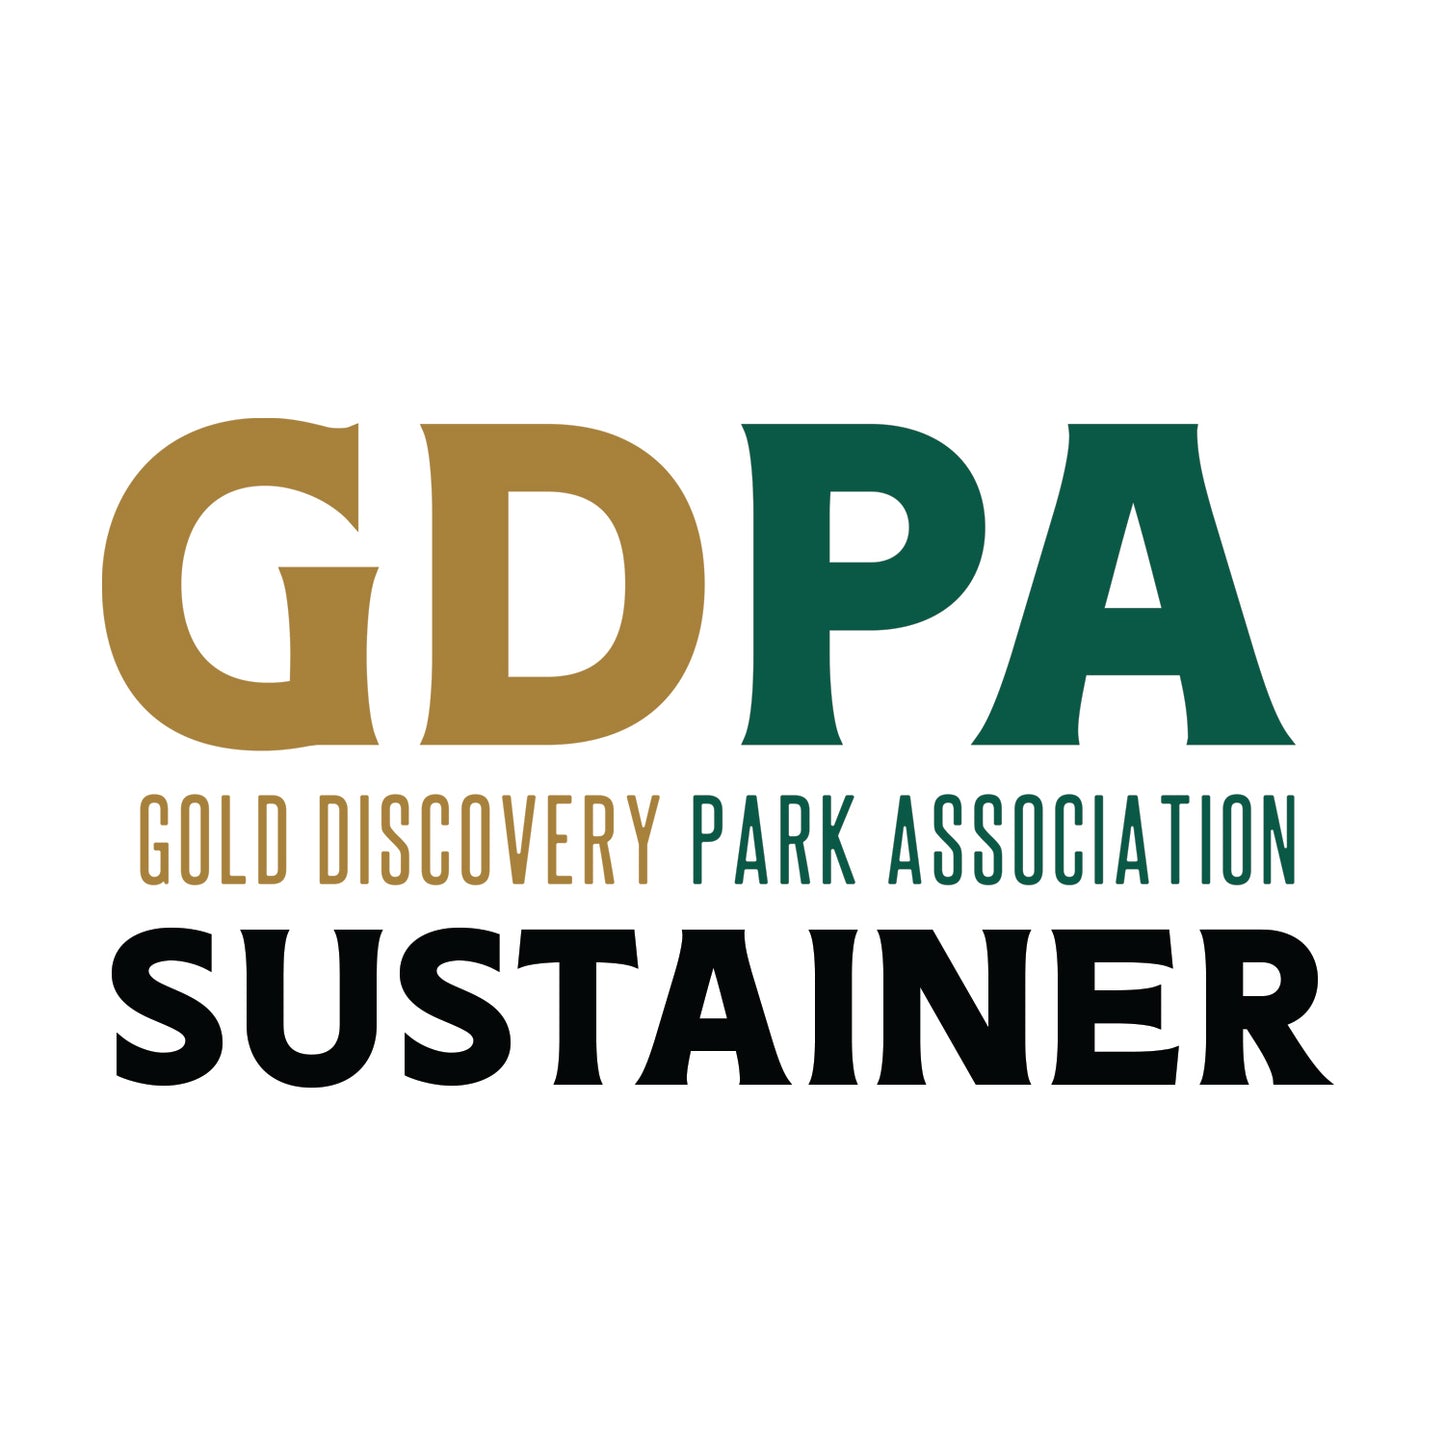 Gold Discovery Park Association "Sustainer" Membership